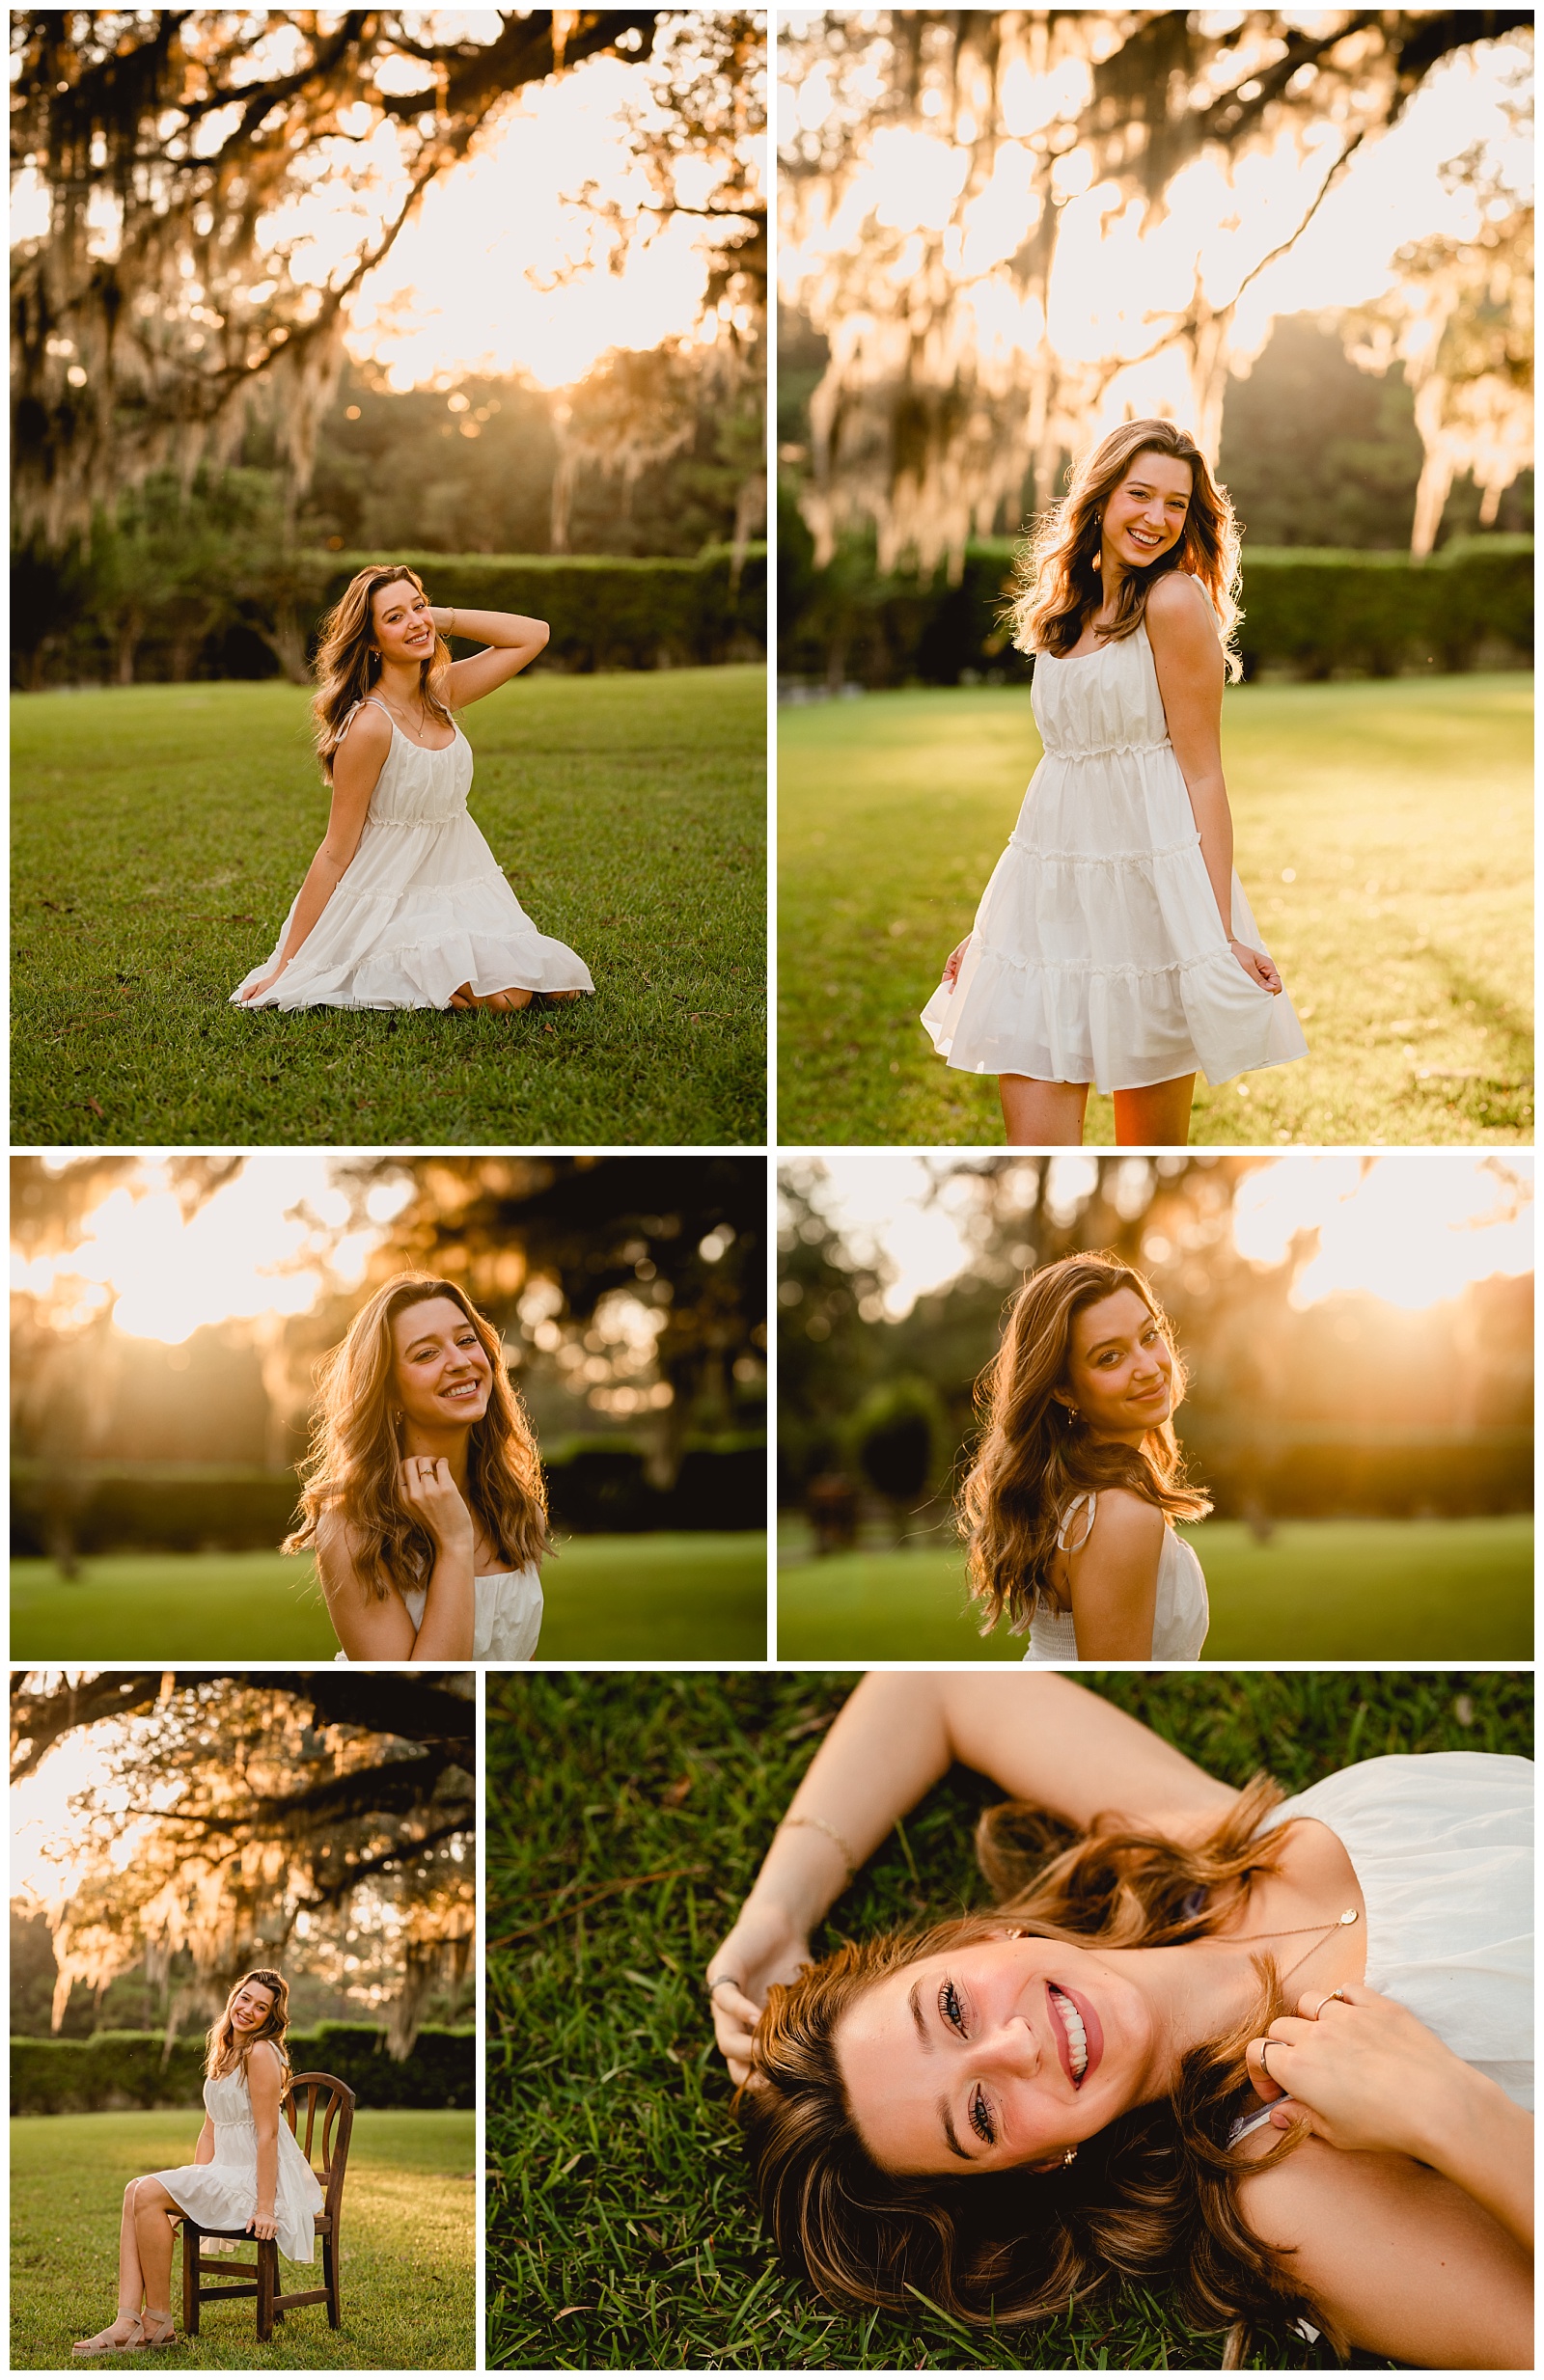 Senior girl outfit ideas with short white dress at sunset in South Georgia.